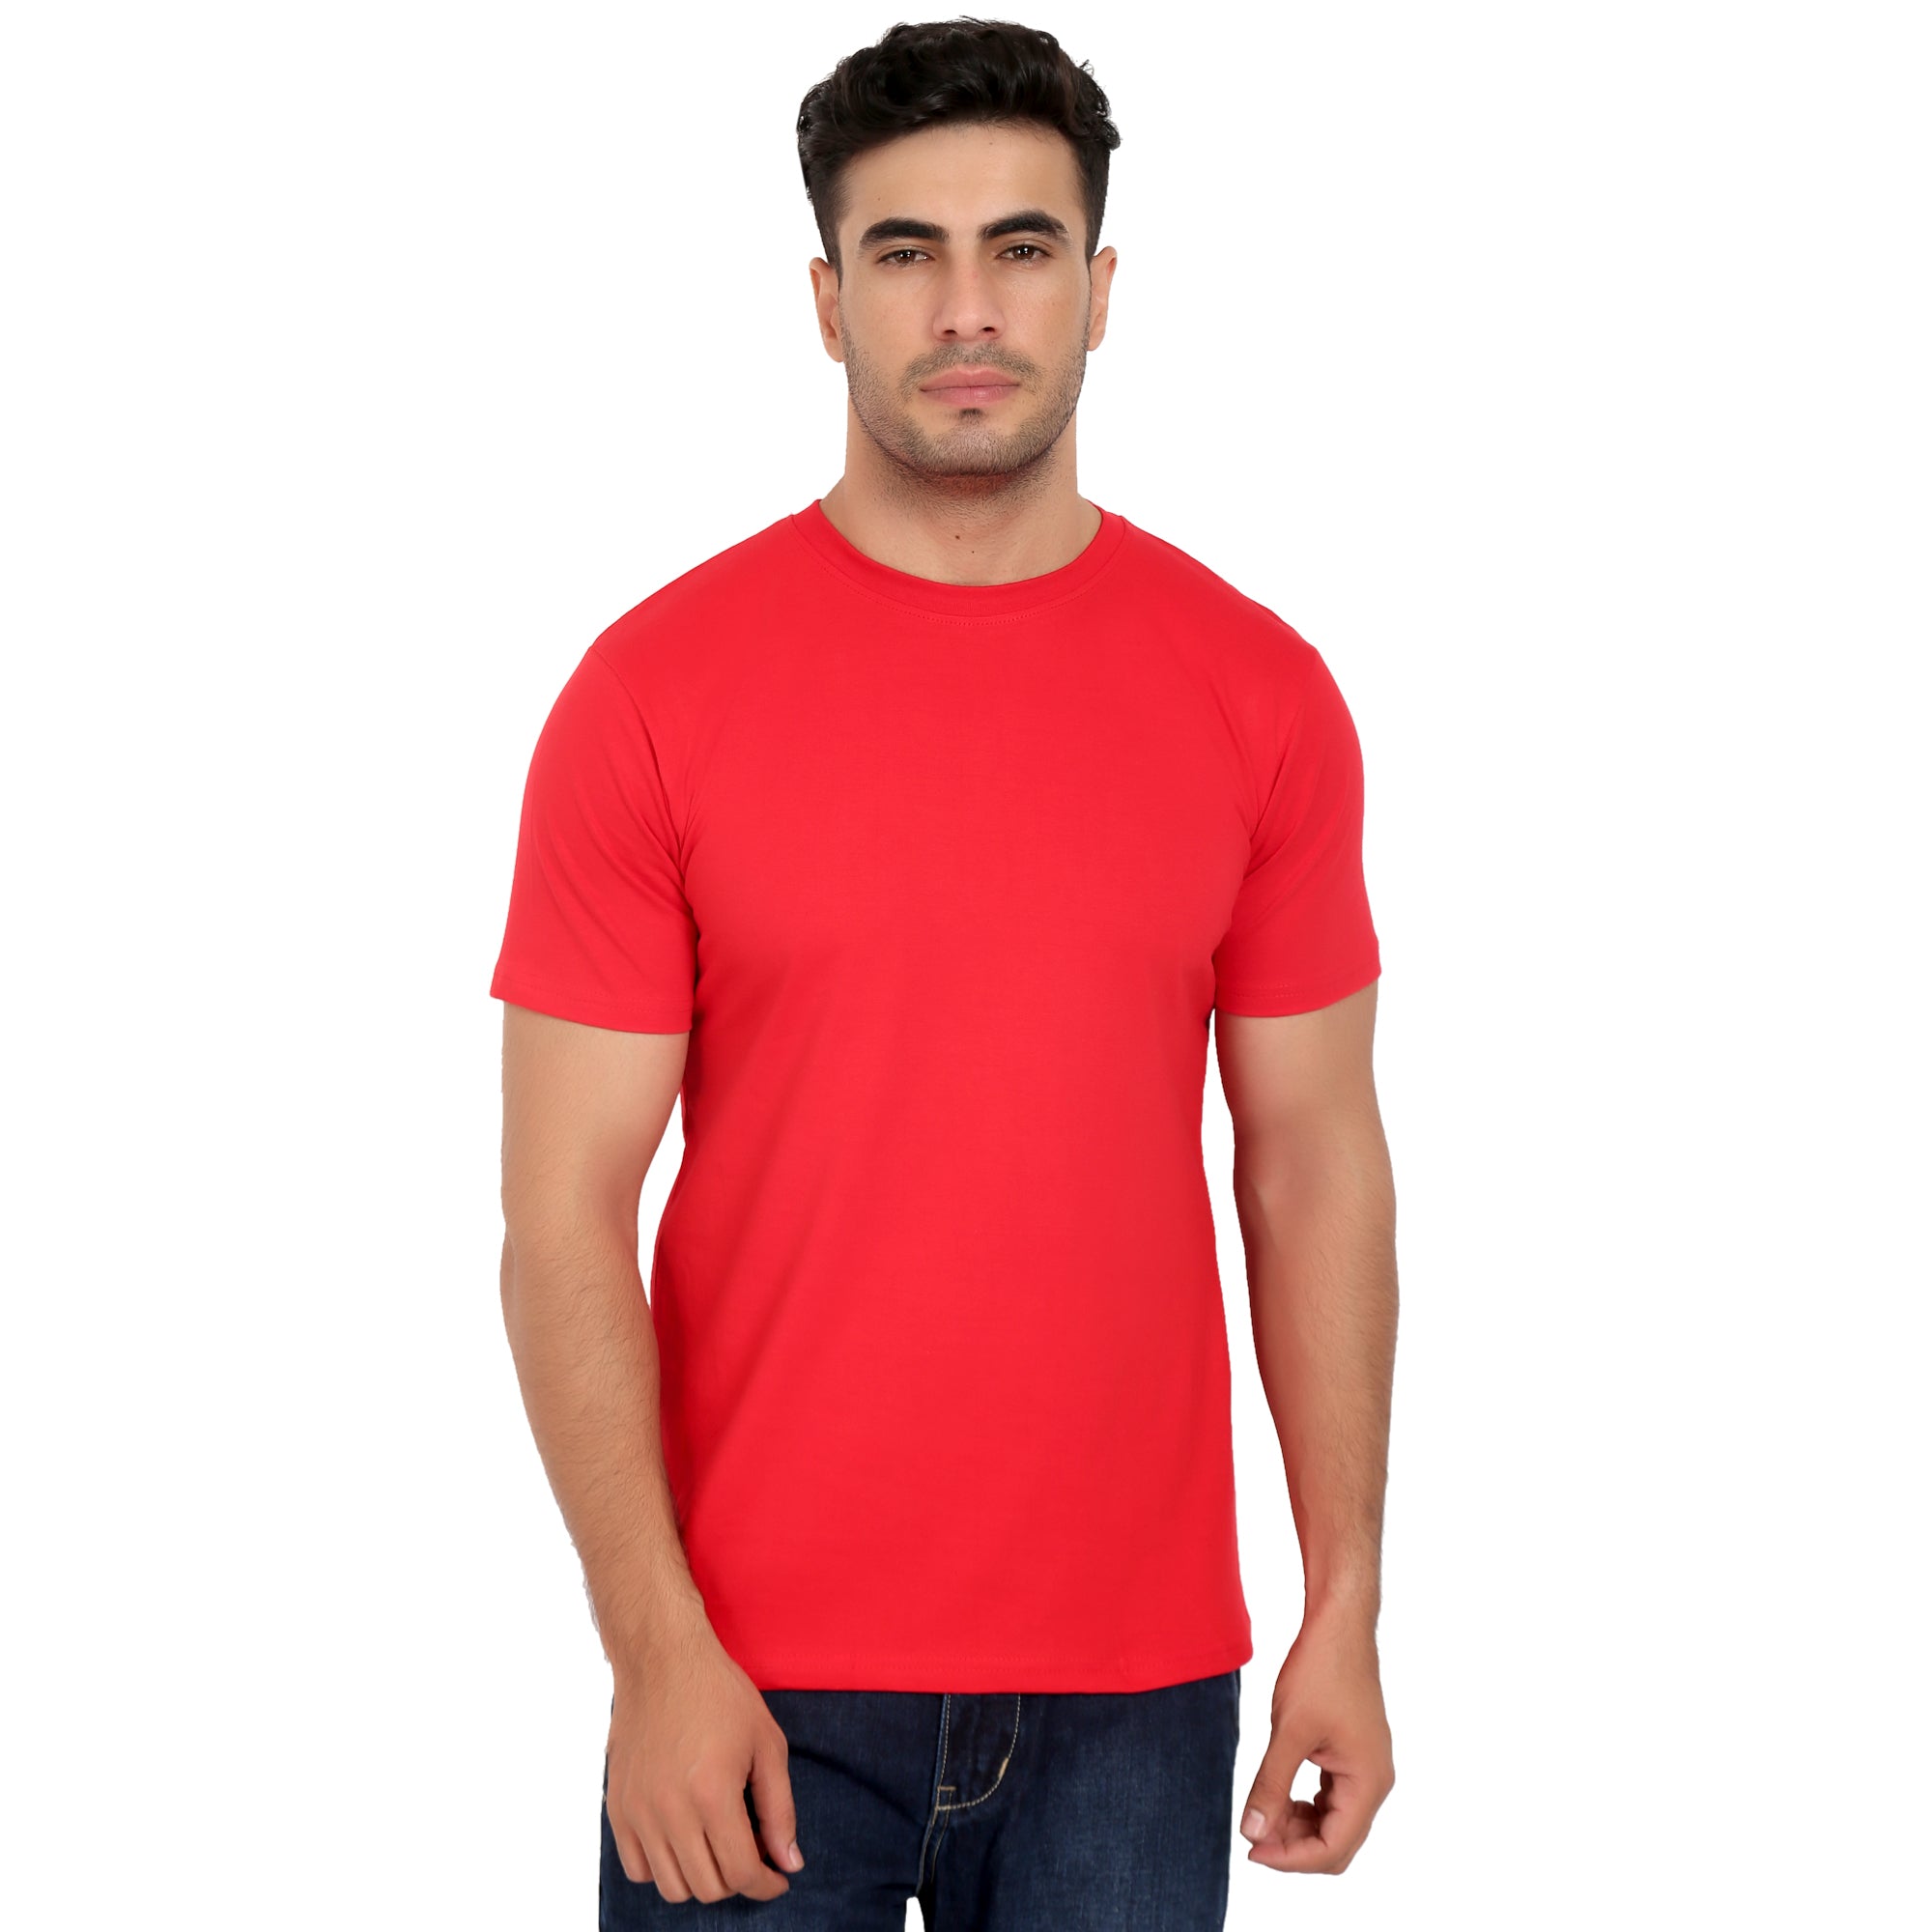 Combo Offer - Men Crew Neck Cotton T-Shirts - Half Sleeves - 3 Colors - Red, Yellow & White